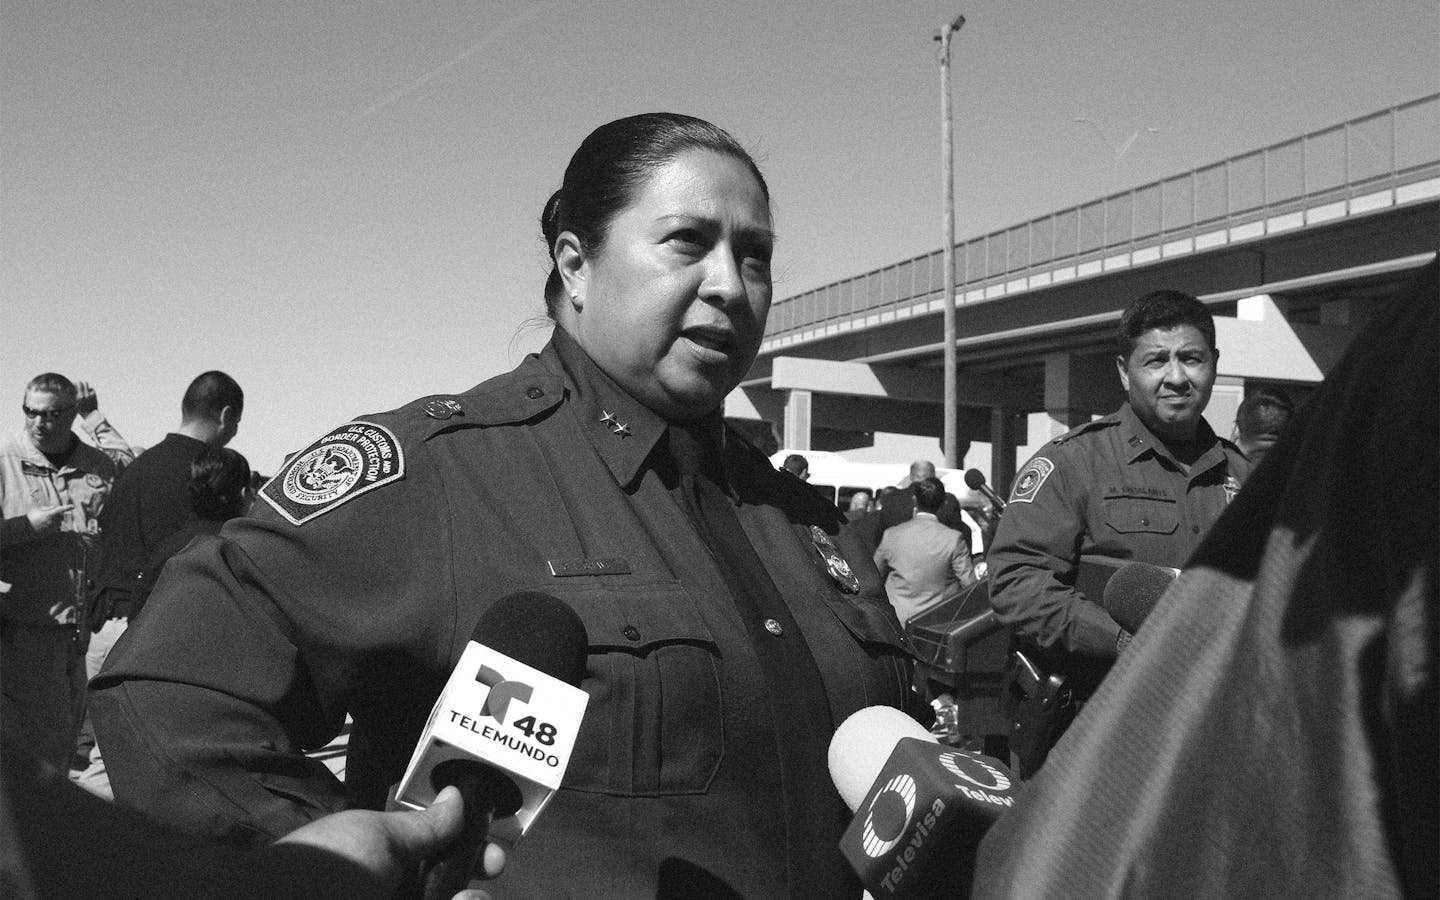 San Diego's new Border Patrol chief shares her priorities. 'We can